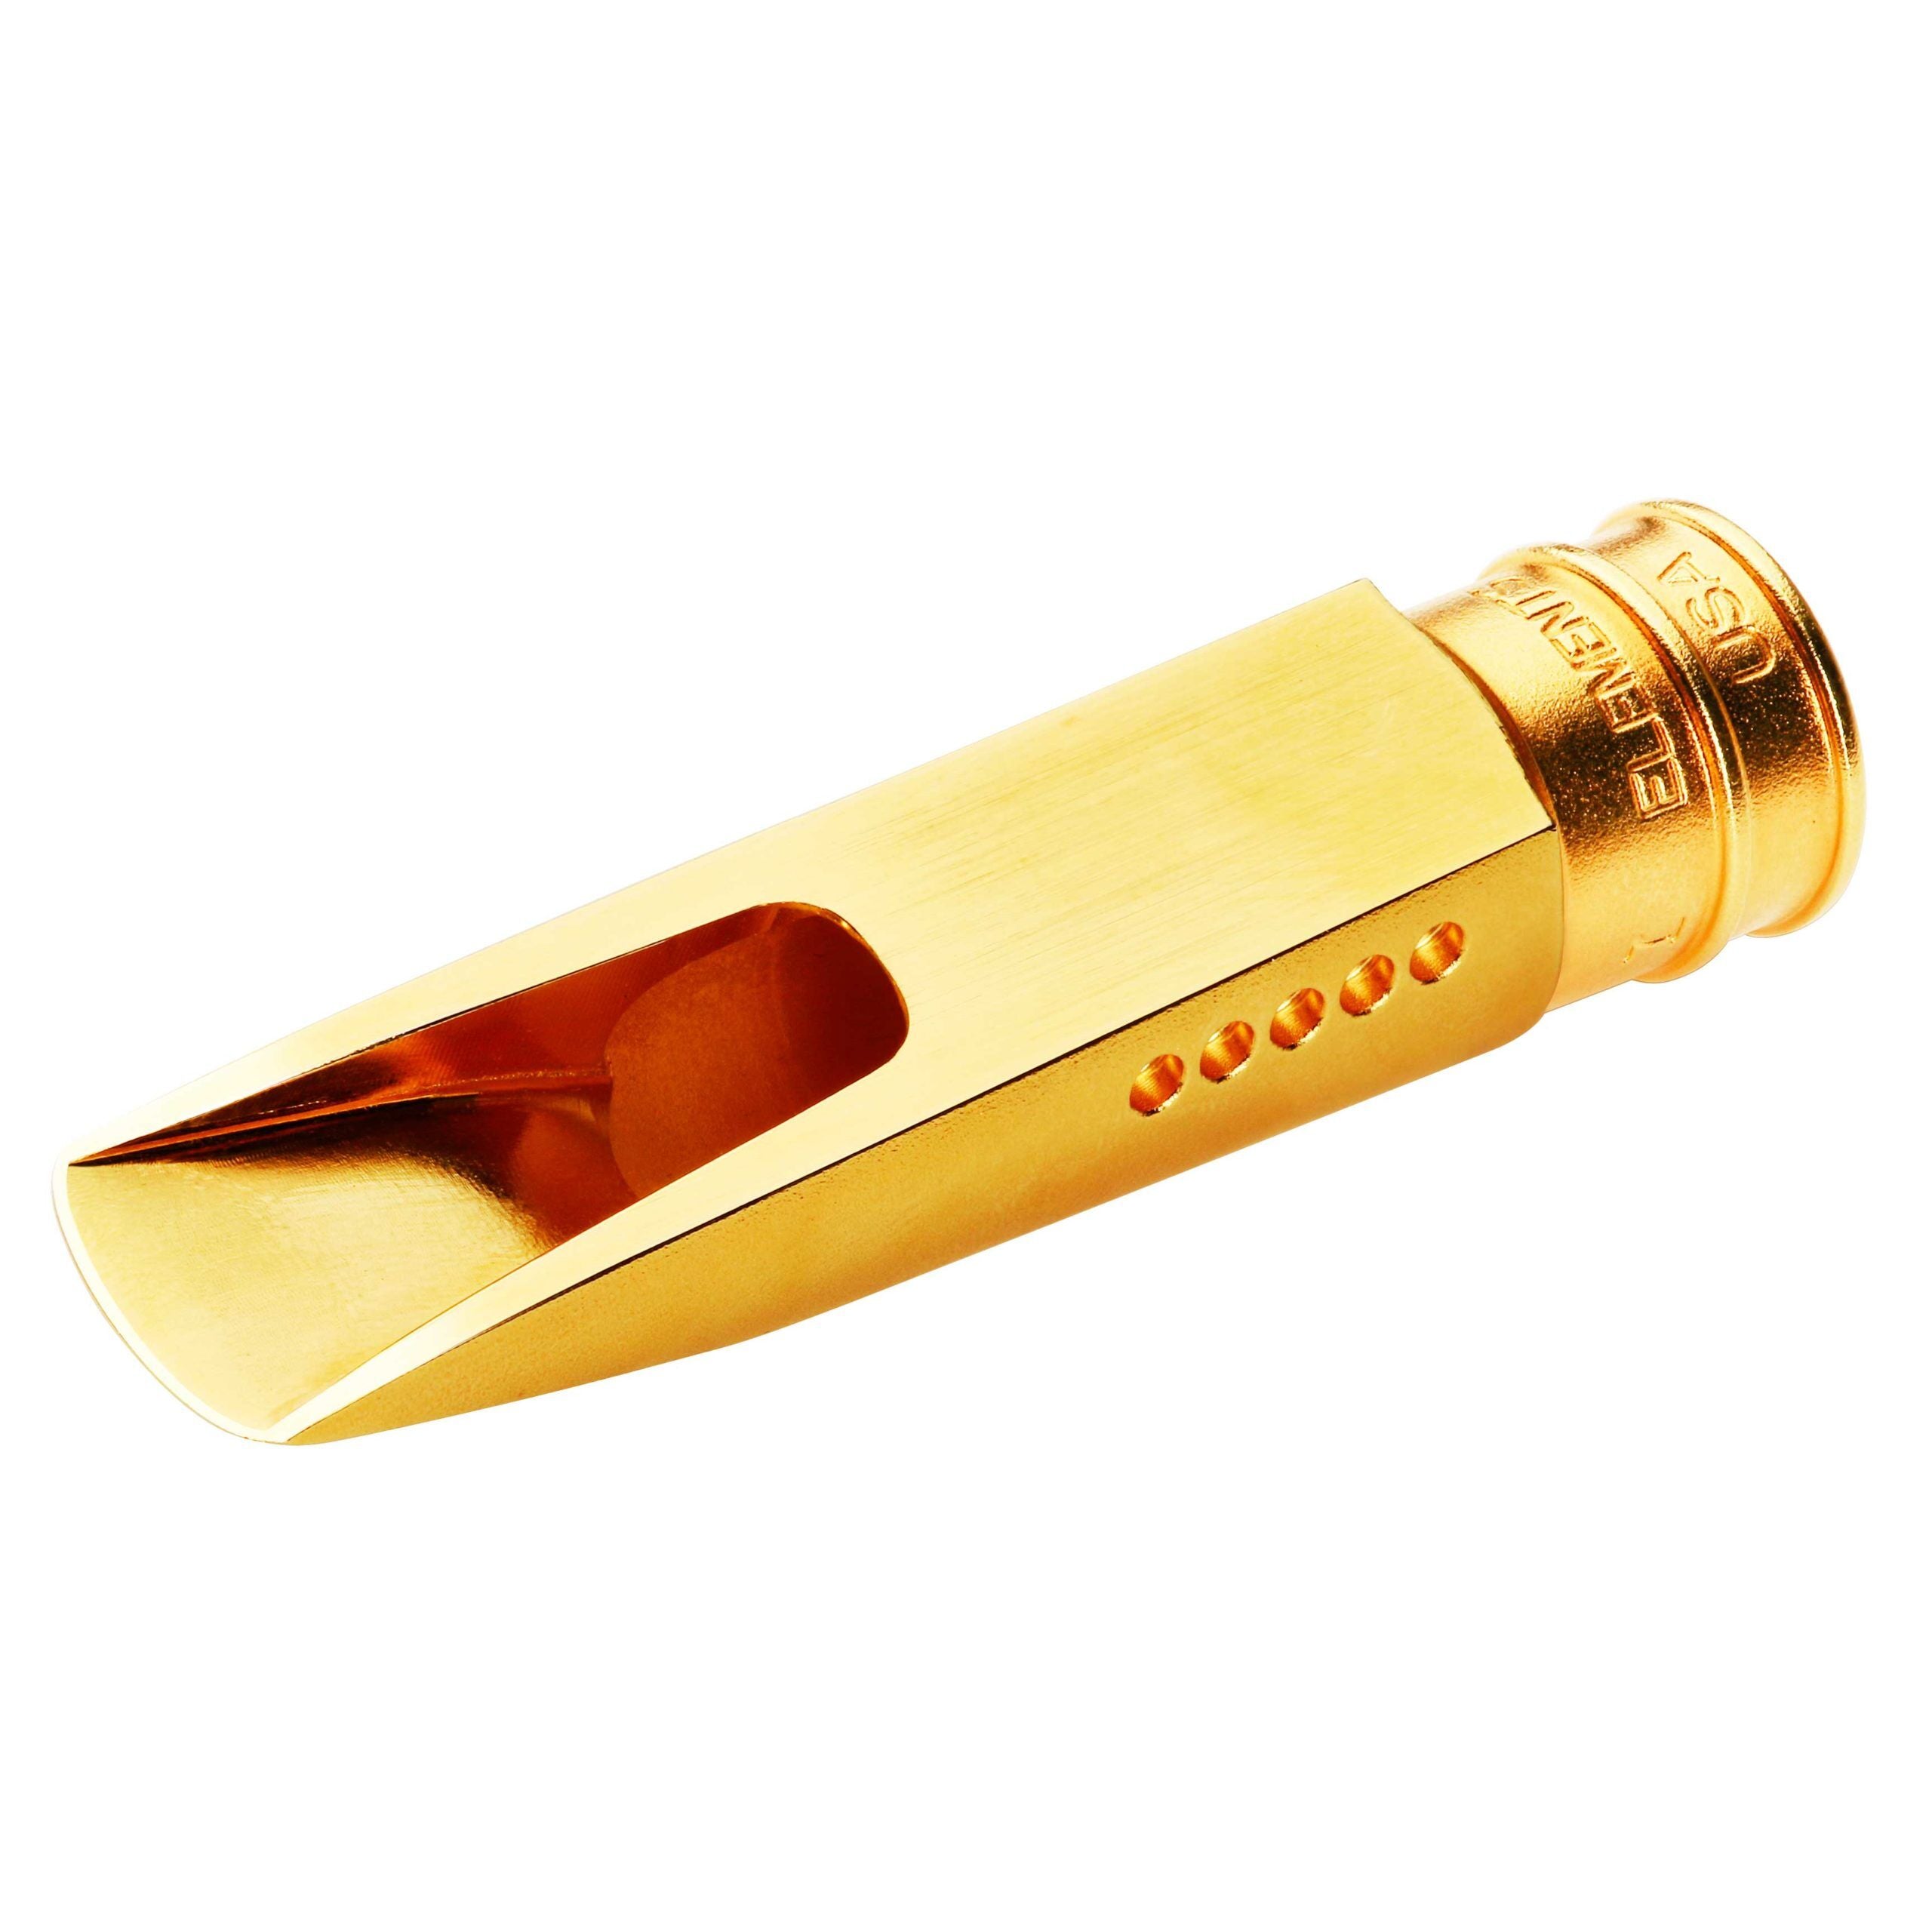 Theo Wanne EARTH Eb Alto Saxophone Metal Mouthpiece (assorted sizes)